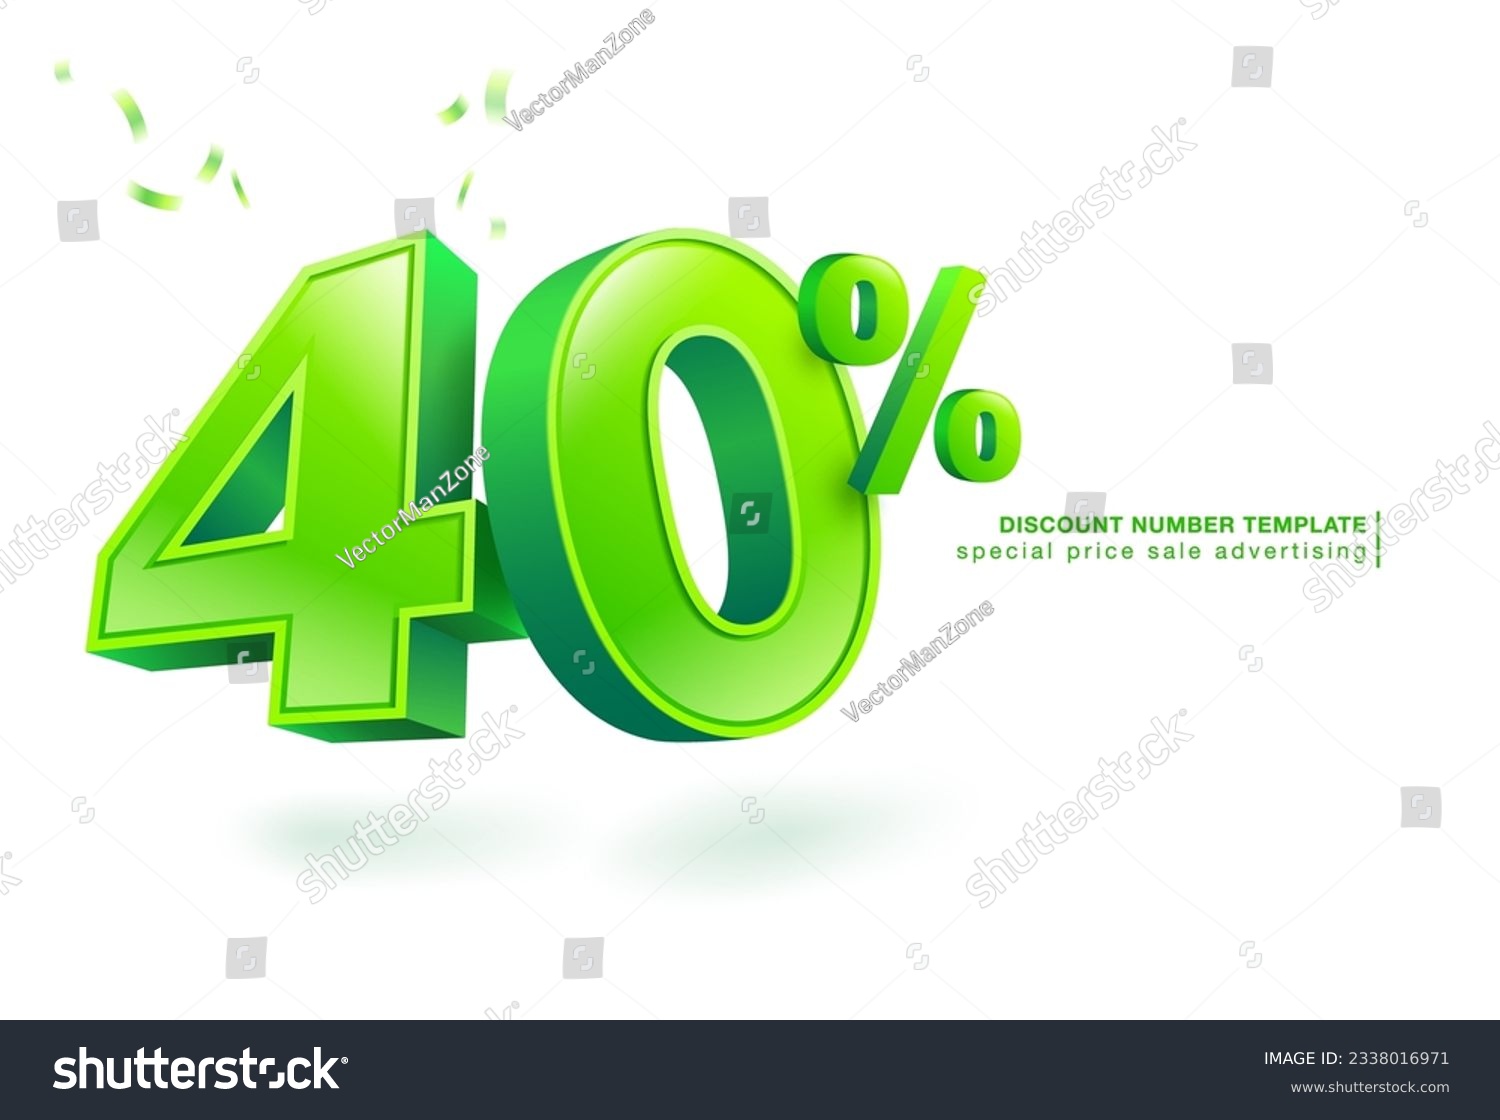 SVG of 40 percent discount. Green lettering template on 40% numbers in three dimensional style. Use for promotional ads in special sale isolated on white background. illustration vector file. svg